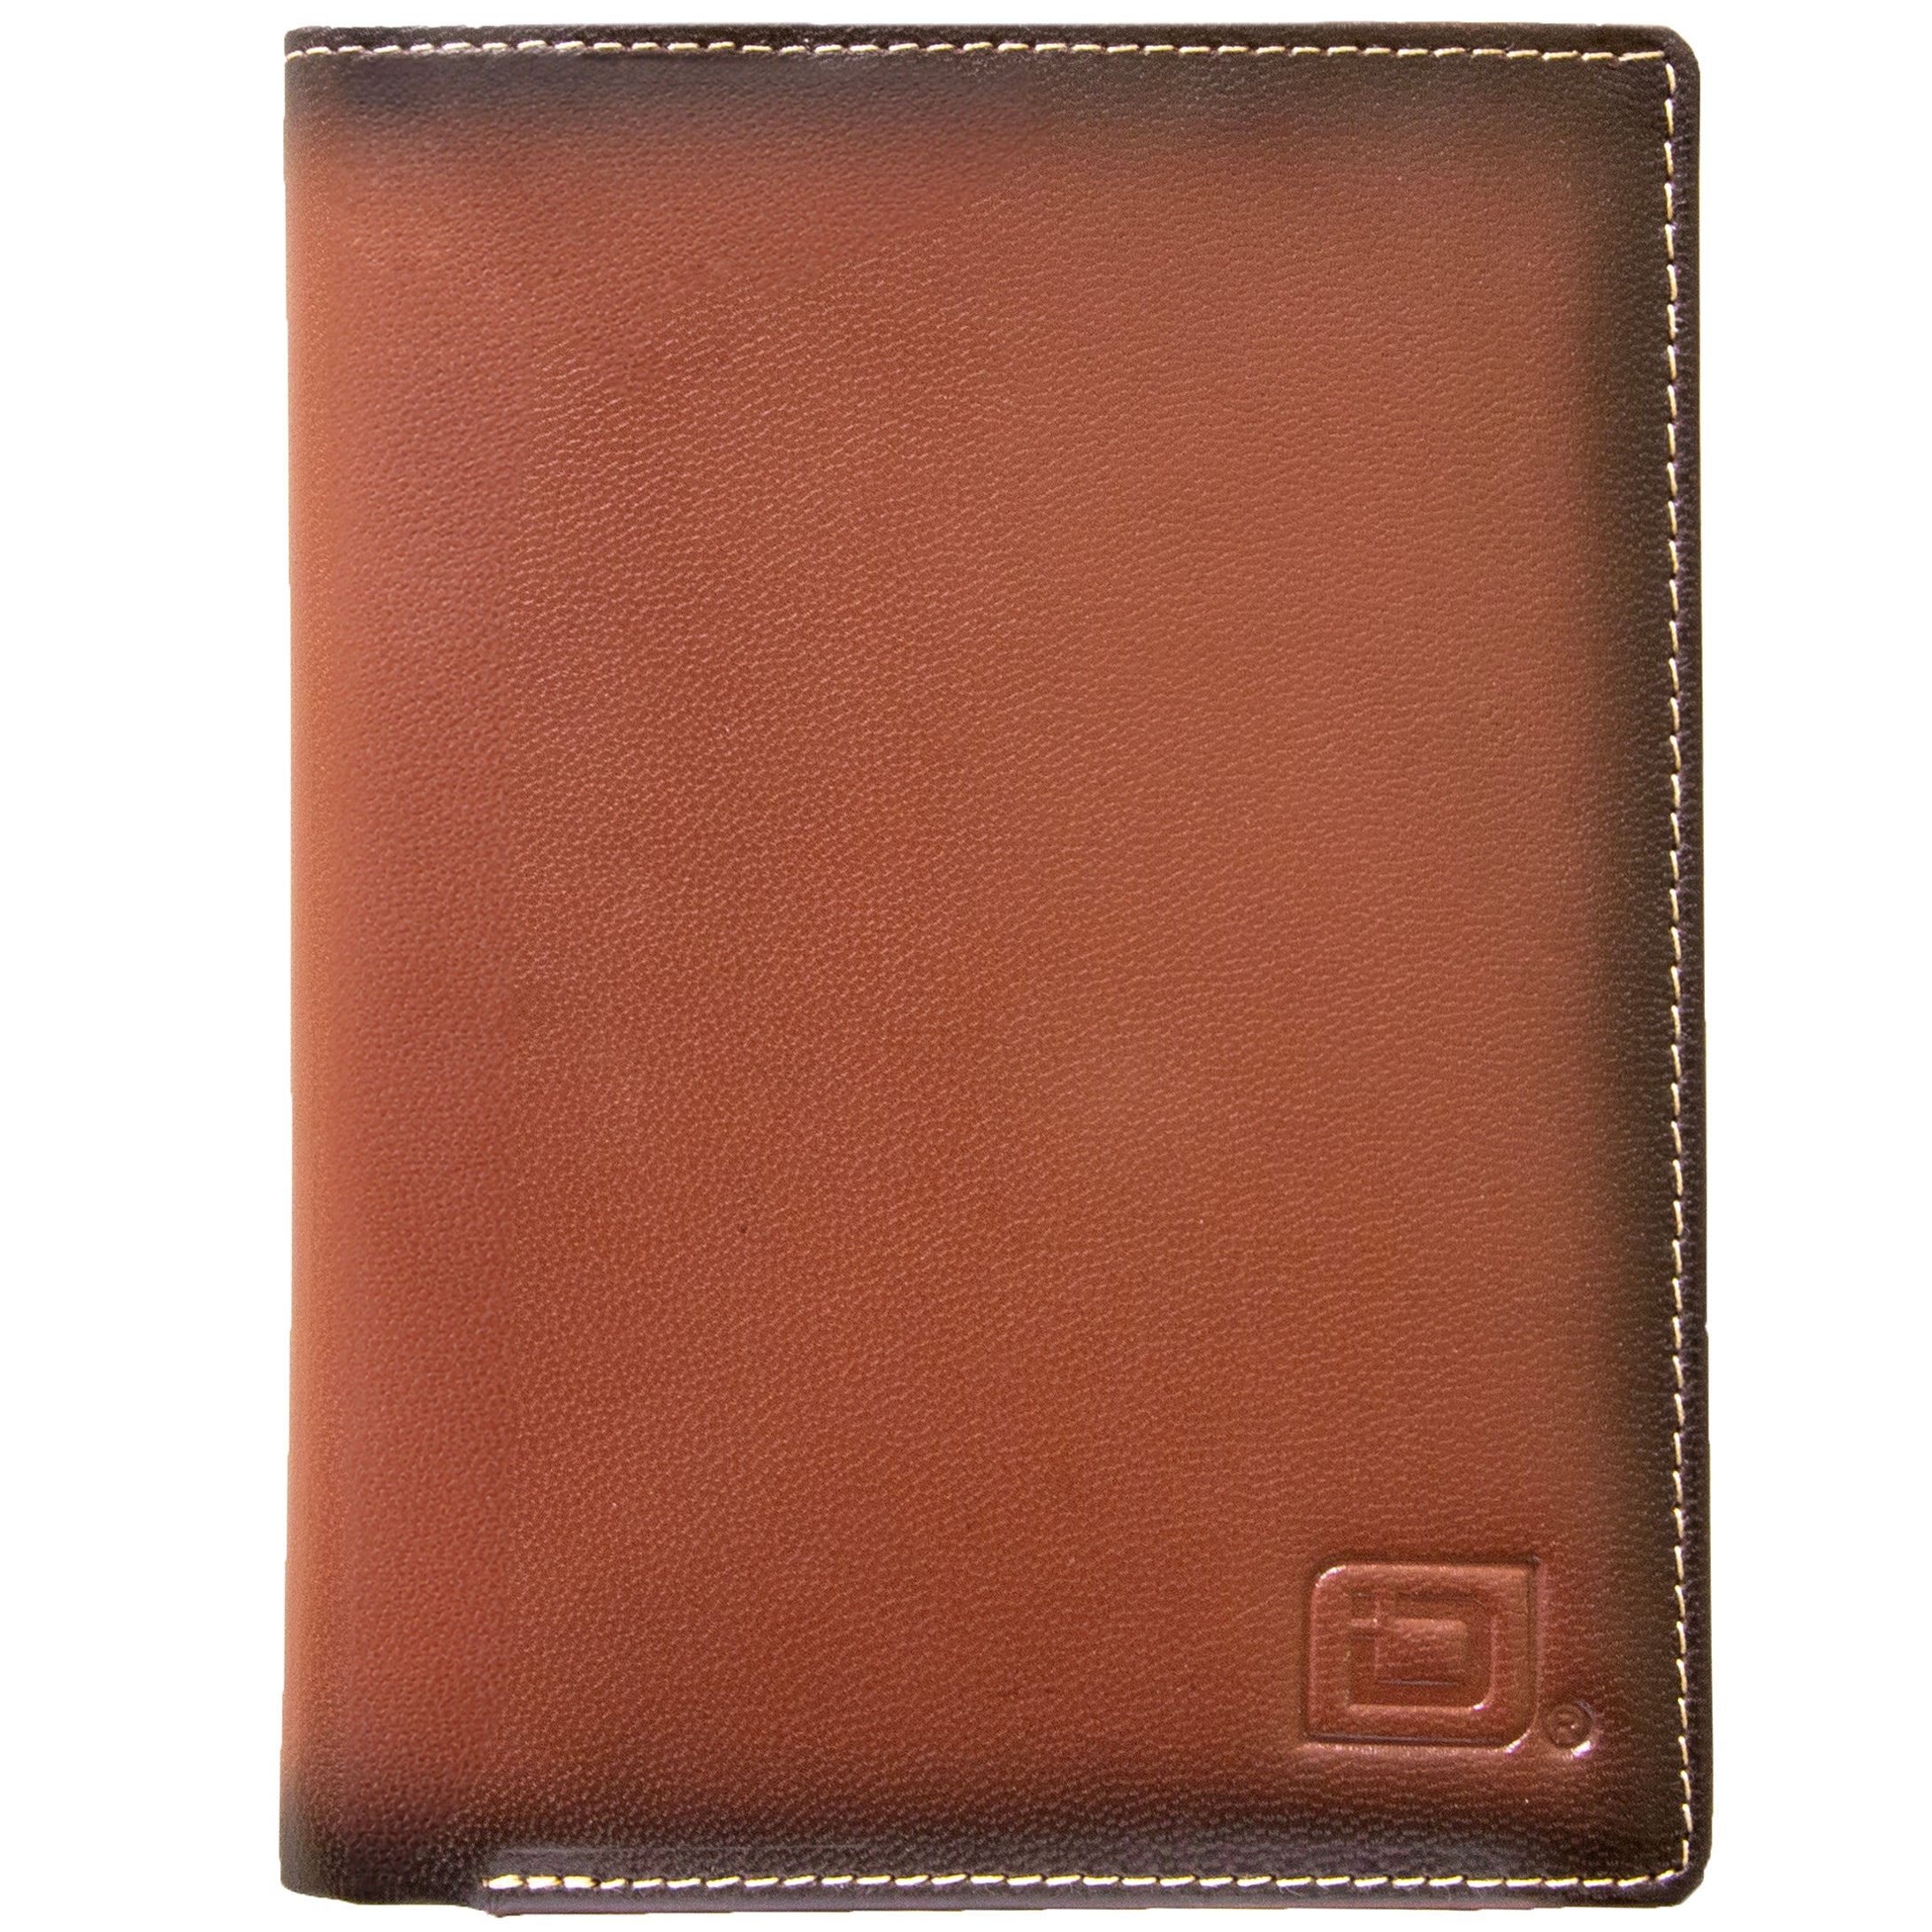 Neck wallet with RFID protection - Skimming protection